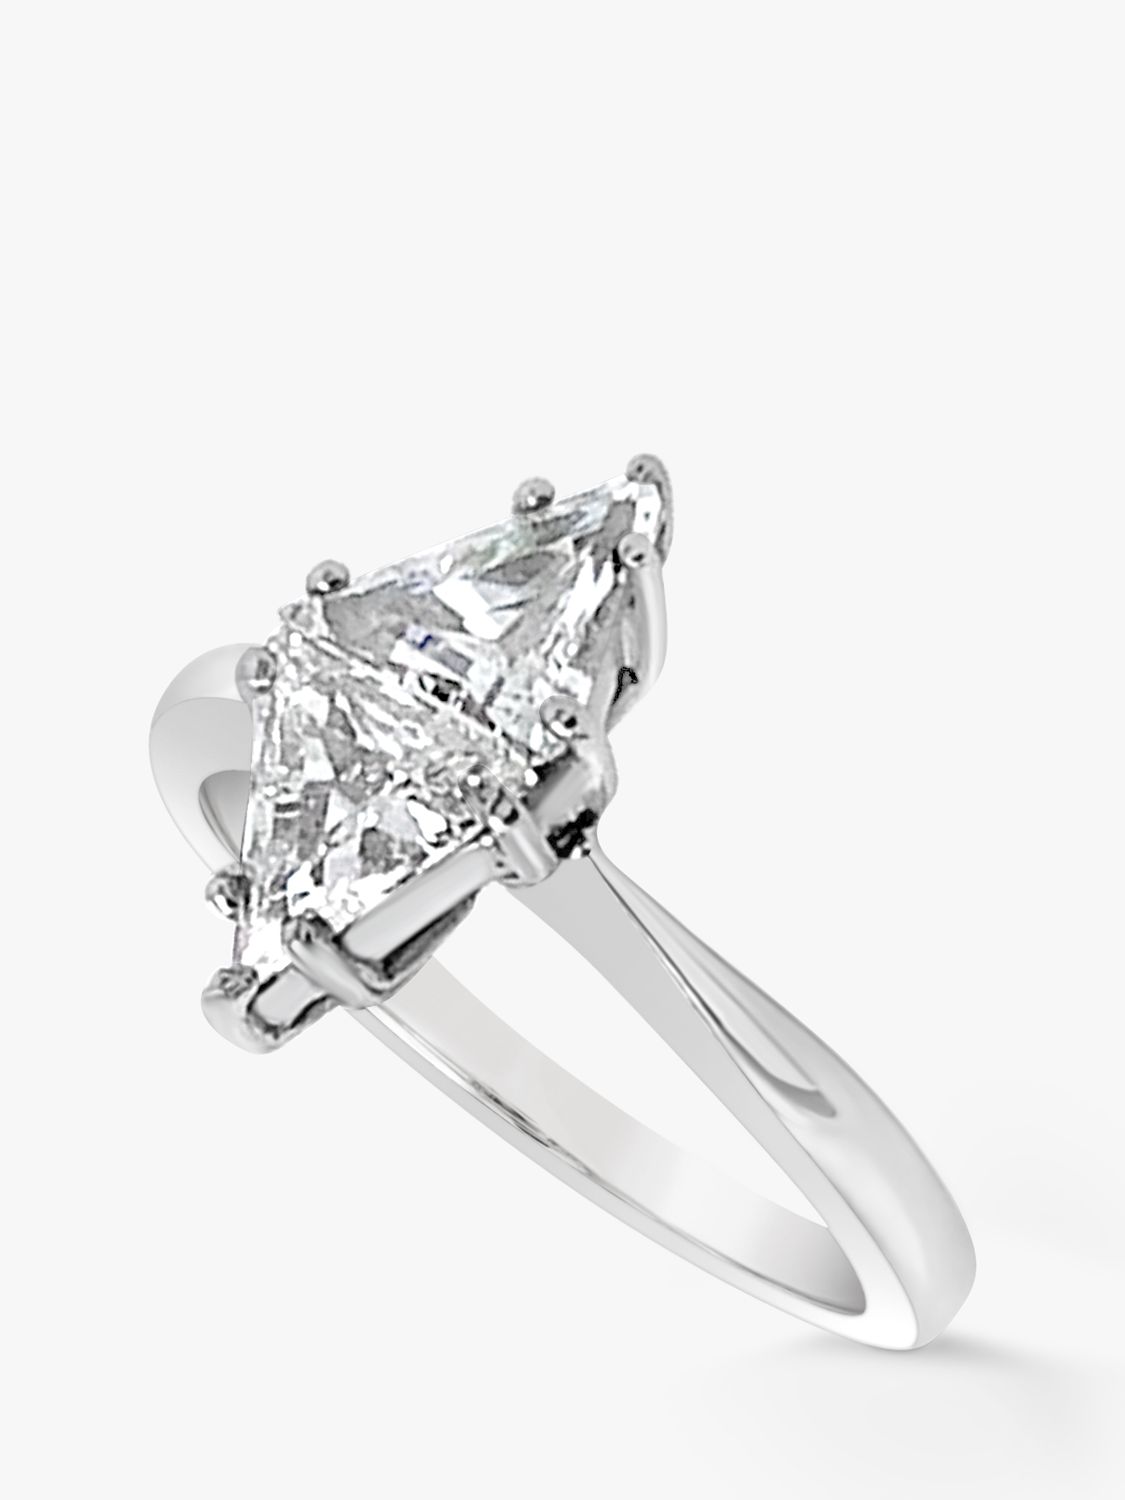 Buy Milton & Humble Jewellery 9ct White Gold Second Hand Trillion Cut Diamond Ring, Dated Circa 2000s Online at johnlewis.com